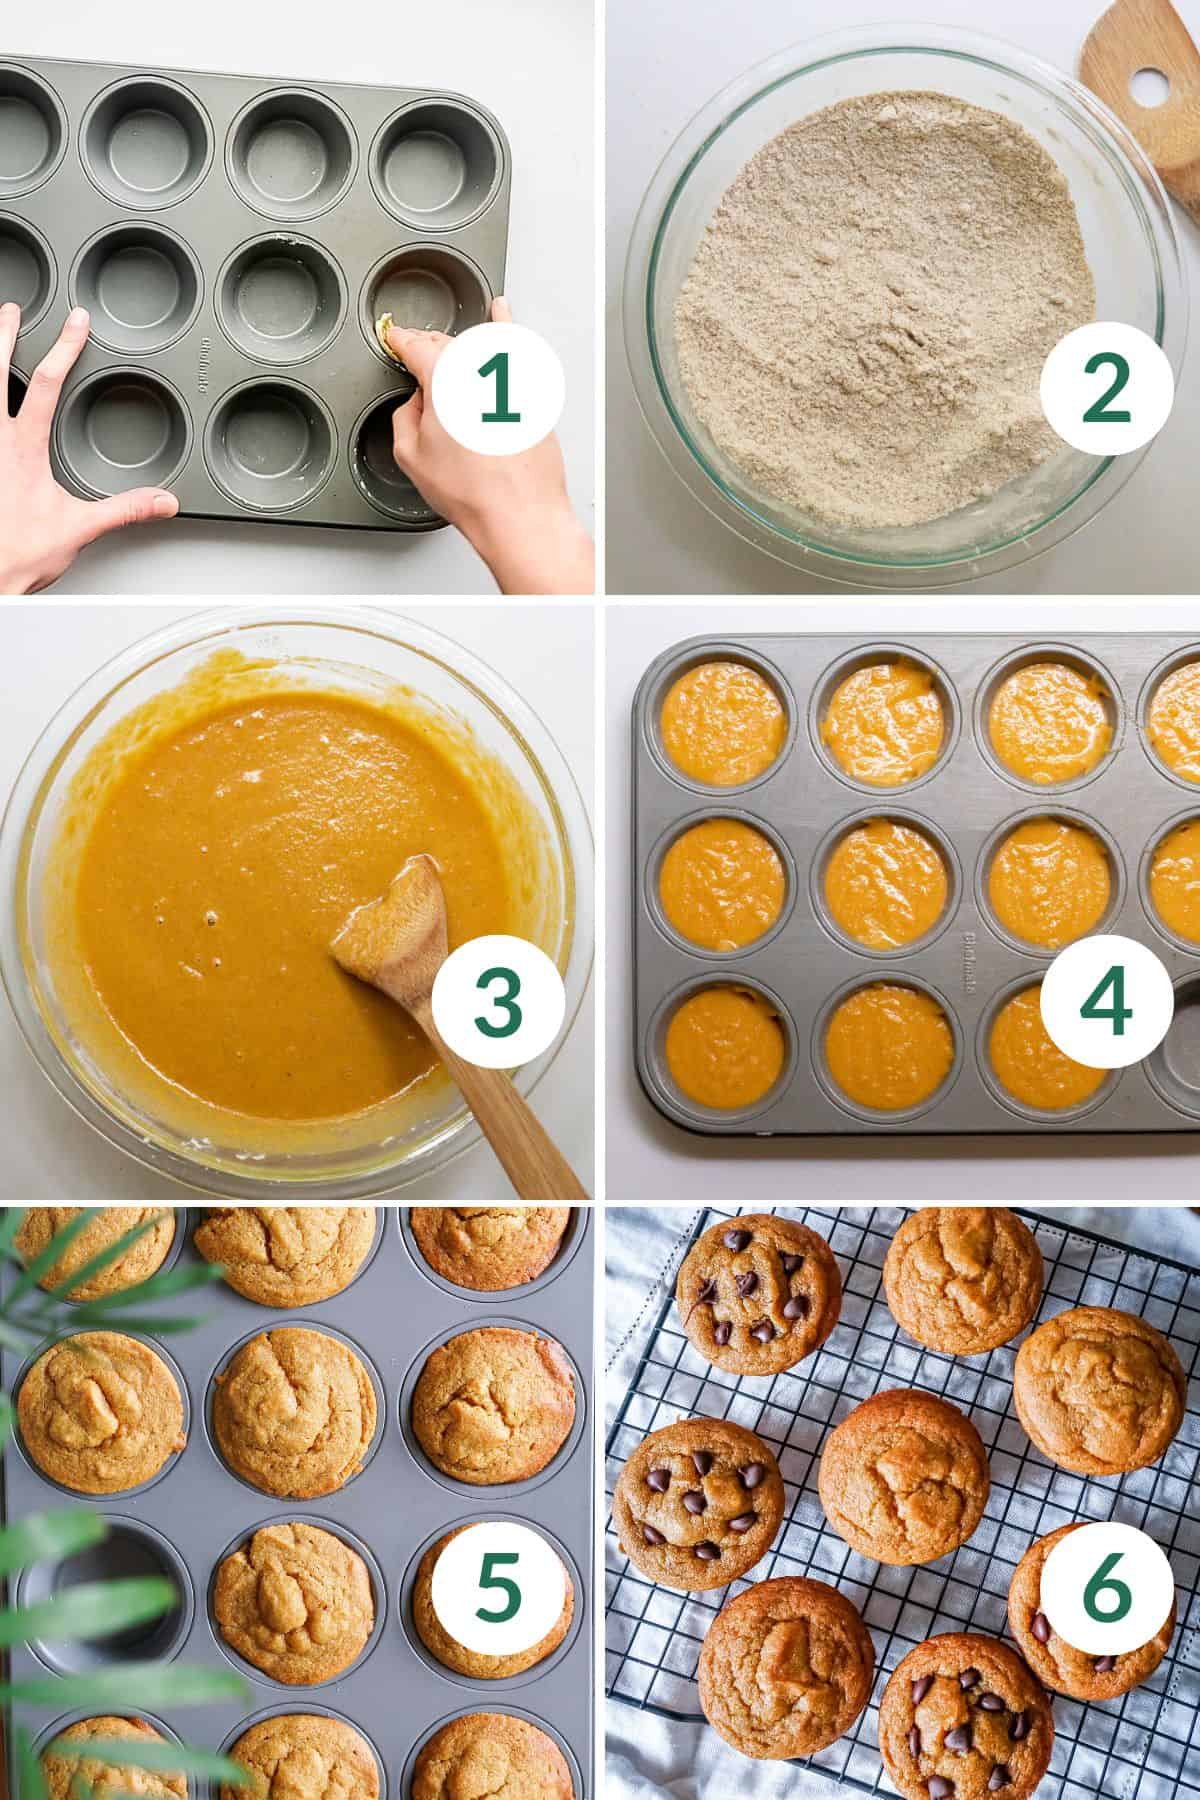 Step by step photos to make healthy pumpkin muffins including mixing the wet and dry ingredients, filling the muffin pan, and baking the muffins.